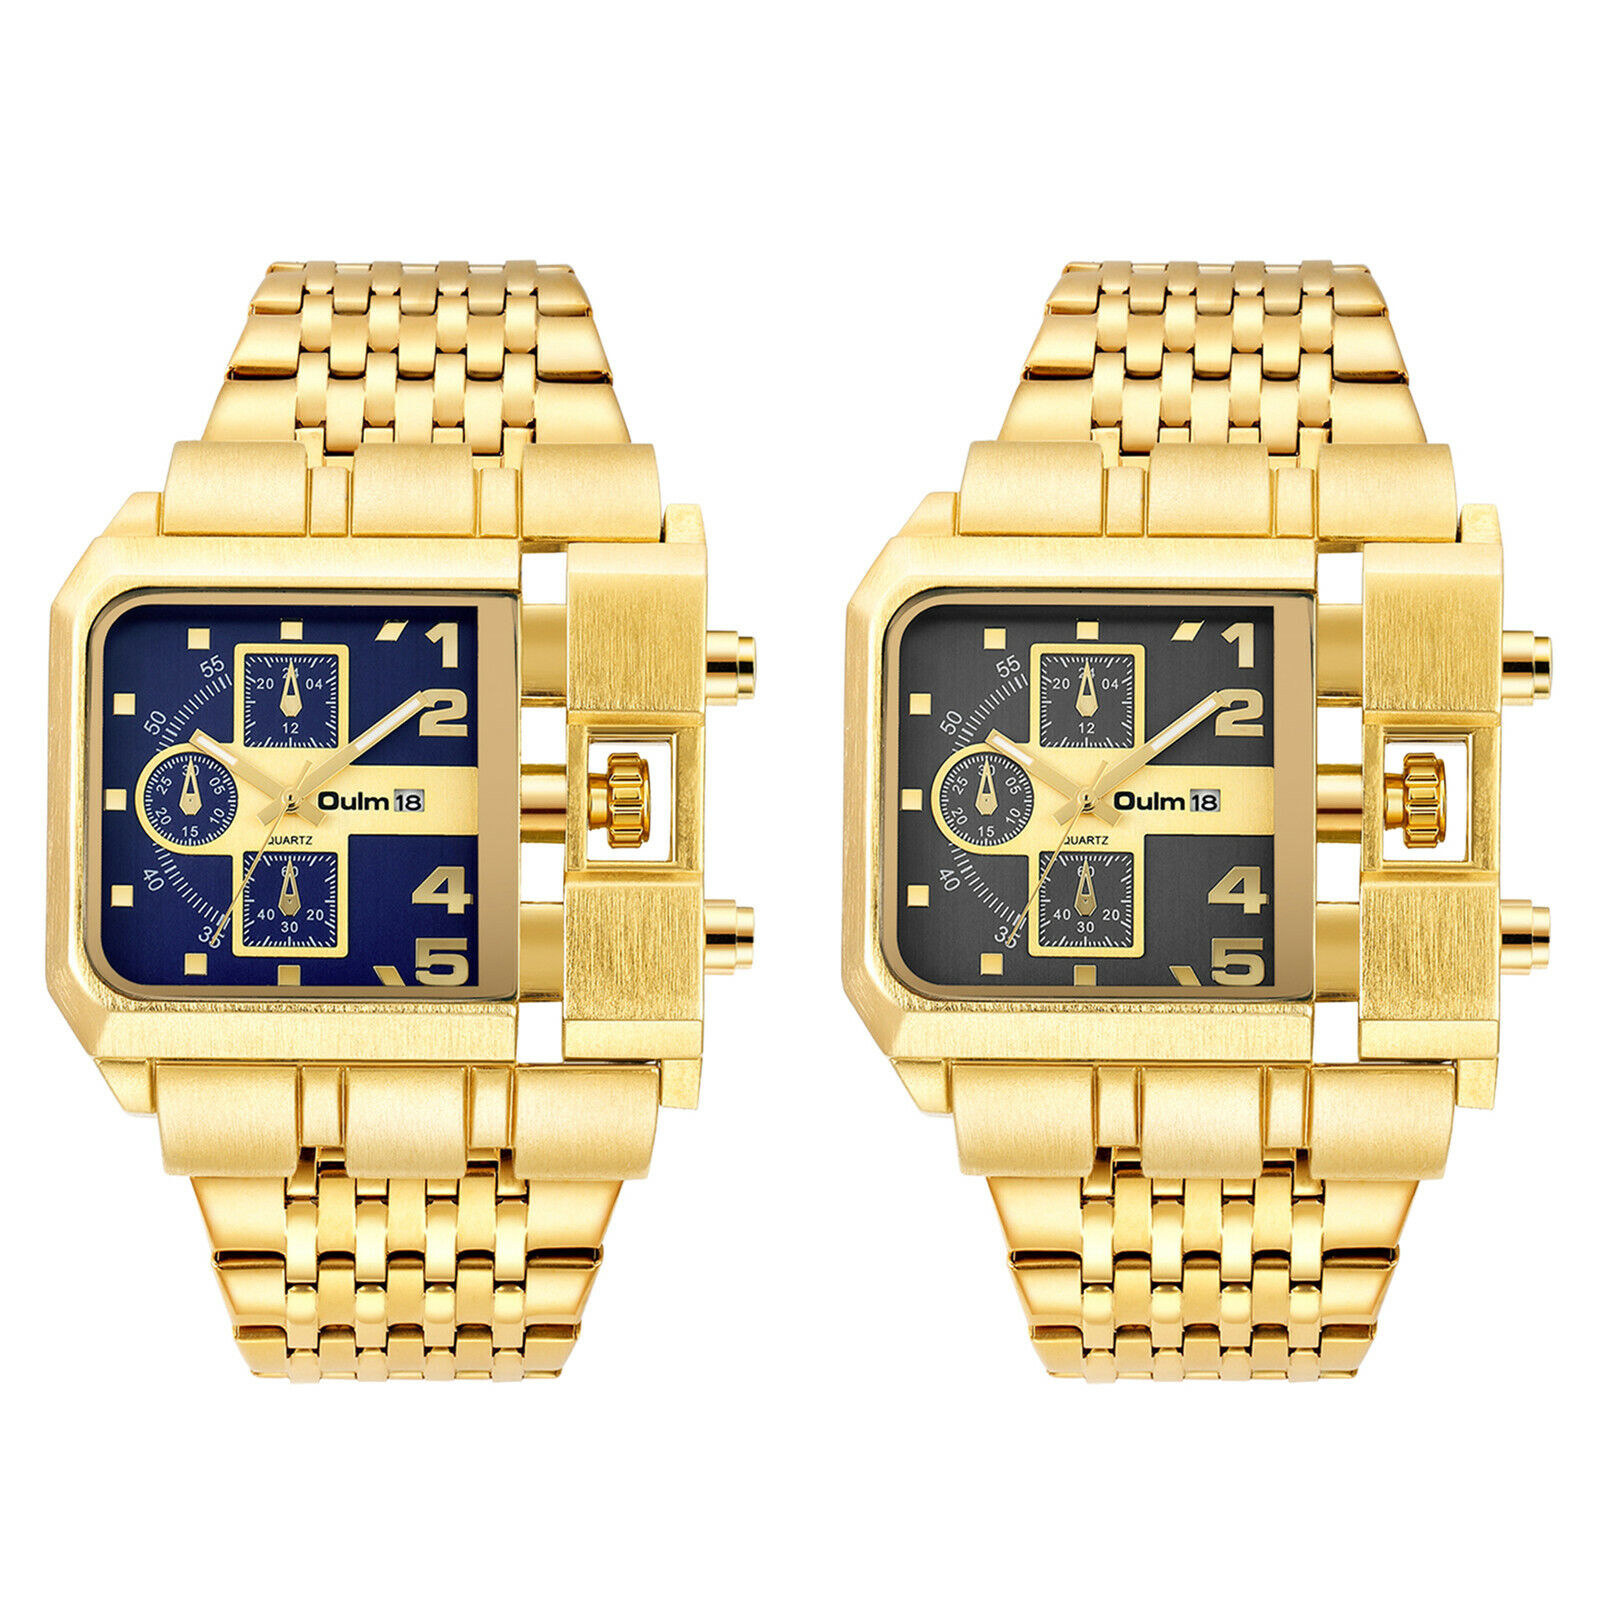 Men's Luxury Gold Tone Date Square Dial Stainless Steel Strap Quartz Wrist Watch